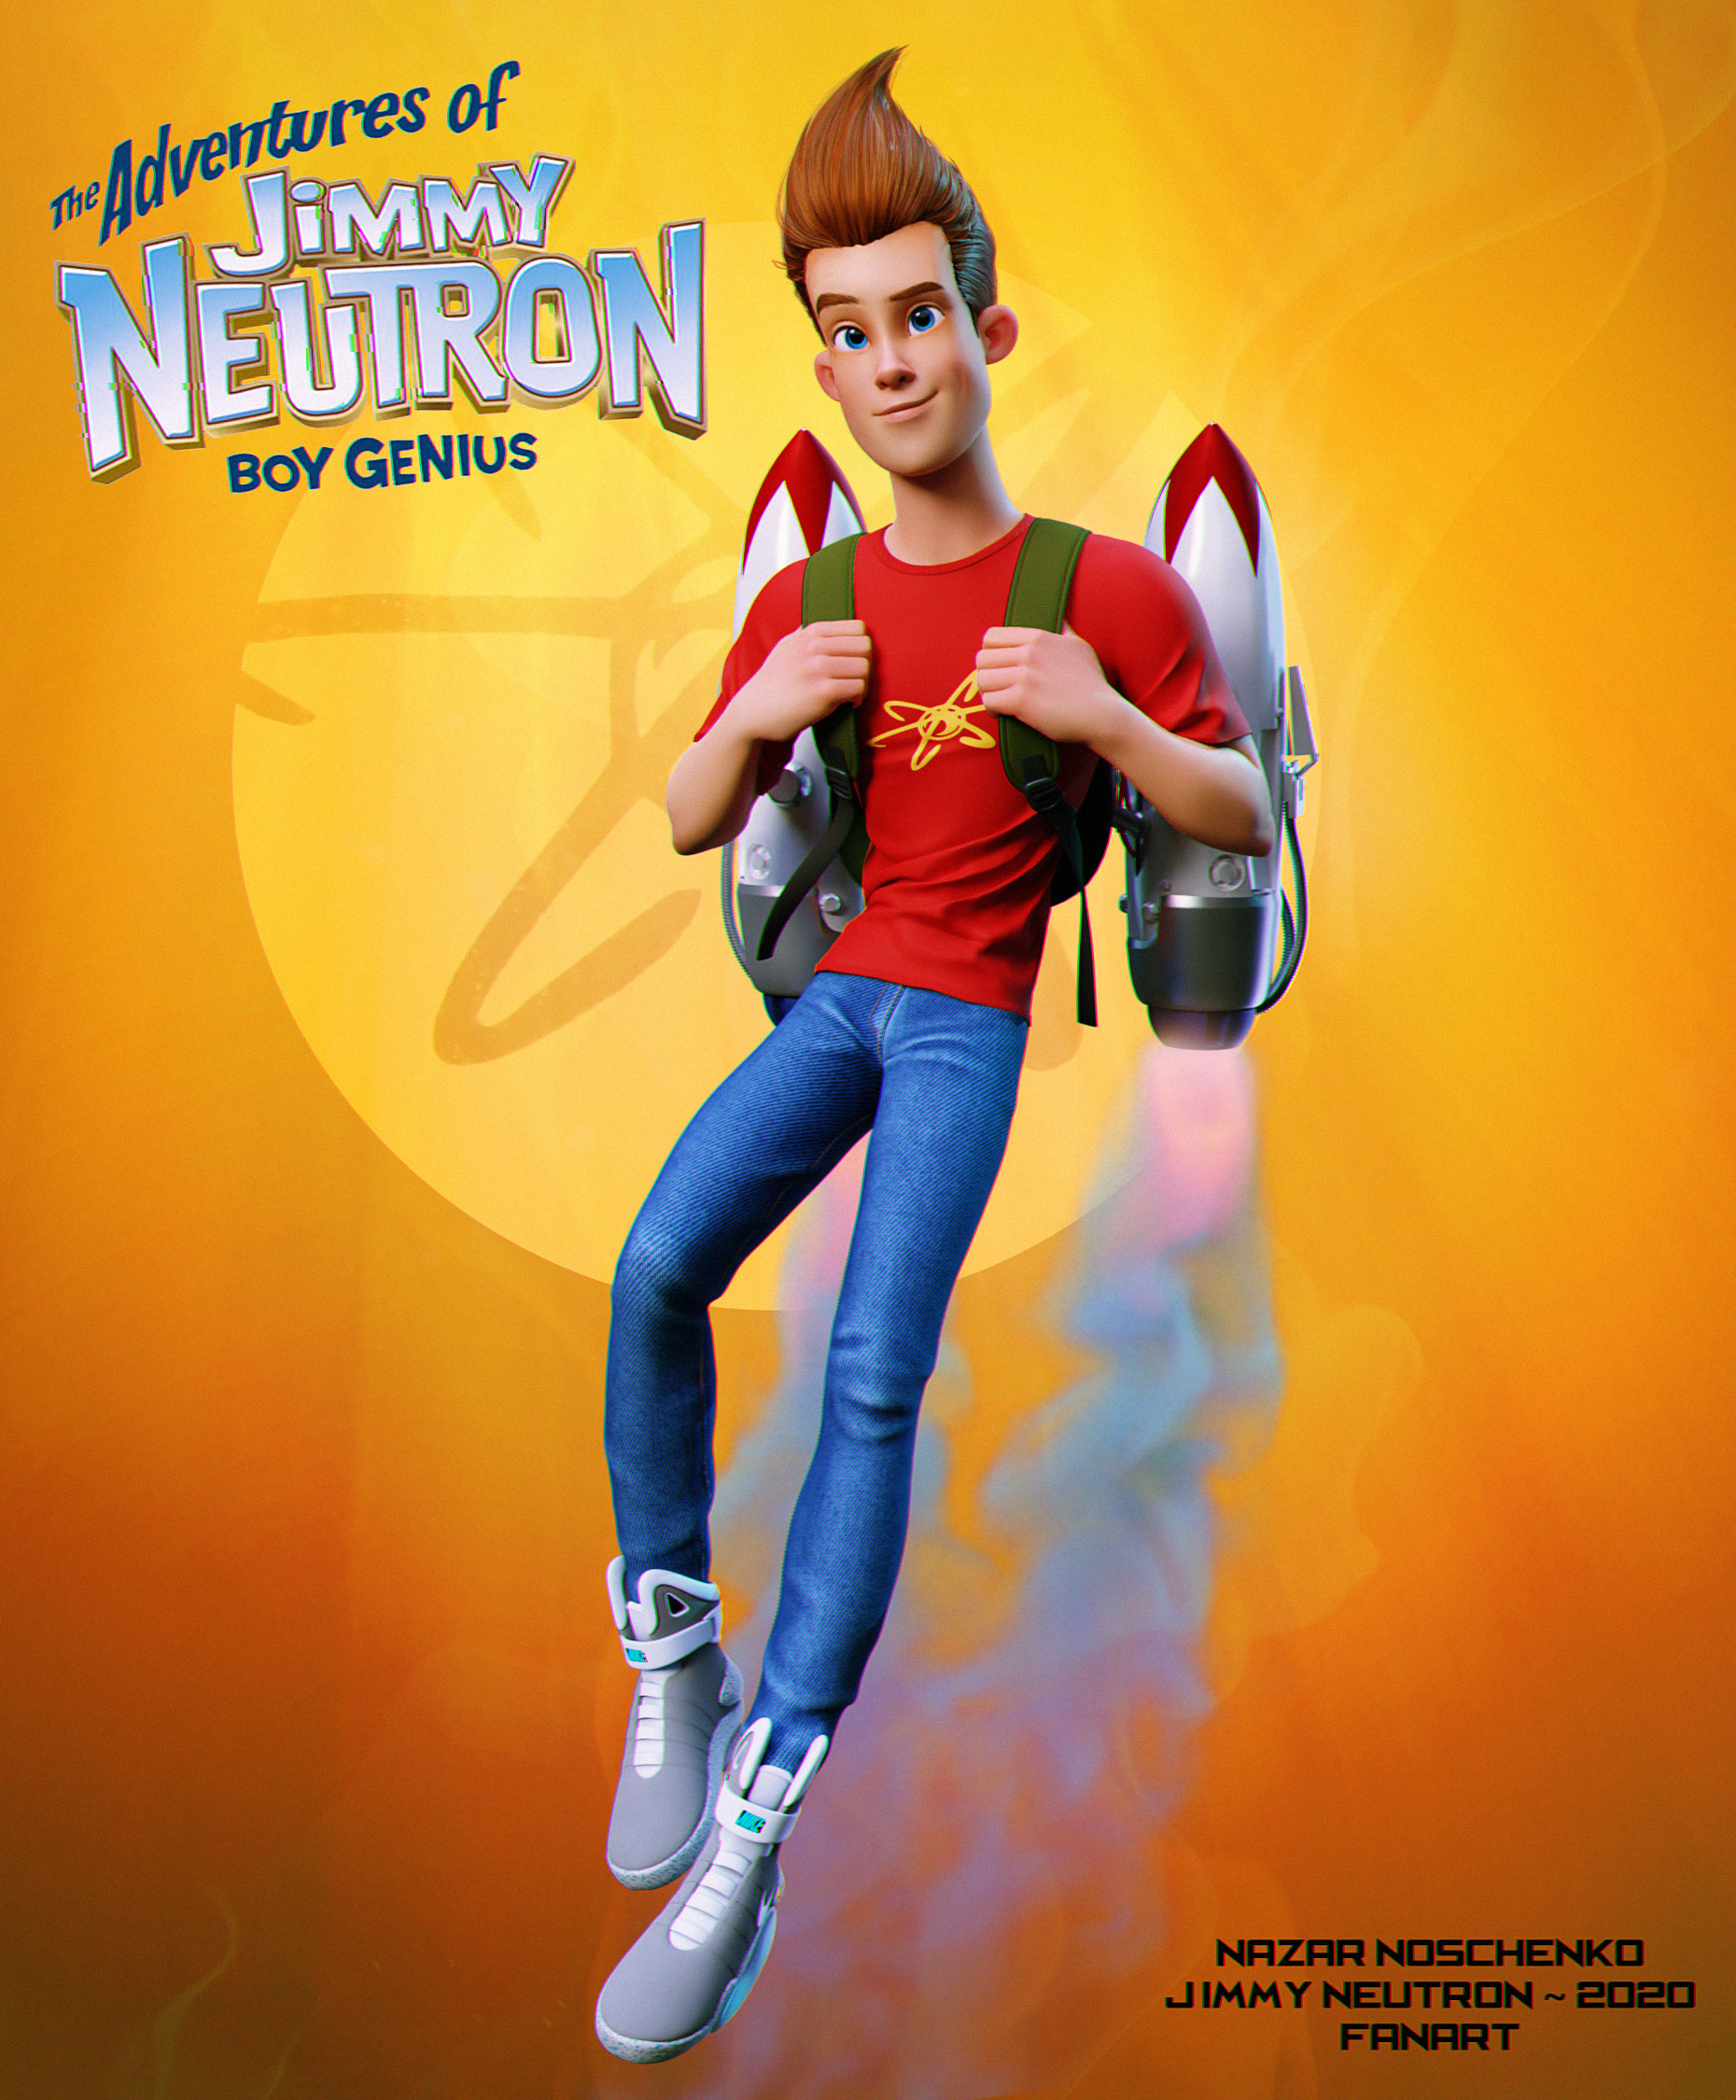 Jimmy Neutron, Finished projects, Blender artists, Community support, 1860x2250 HD Handy